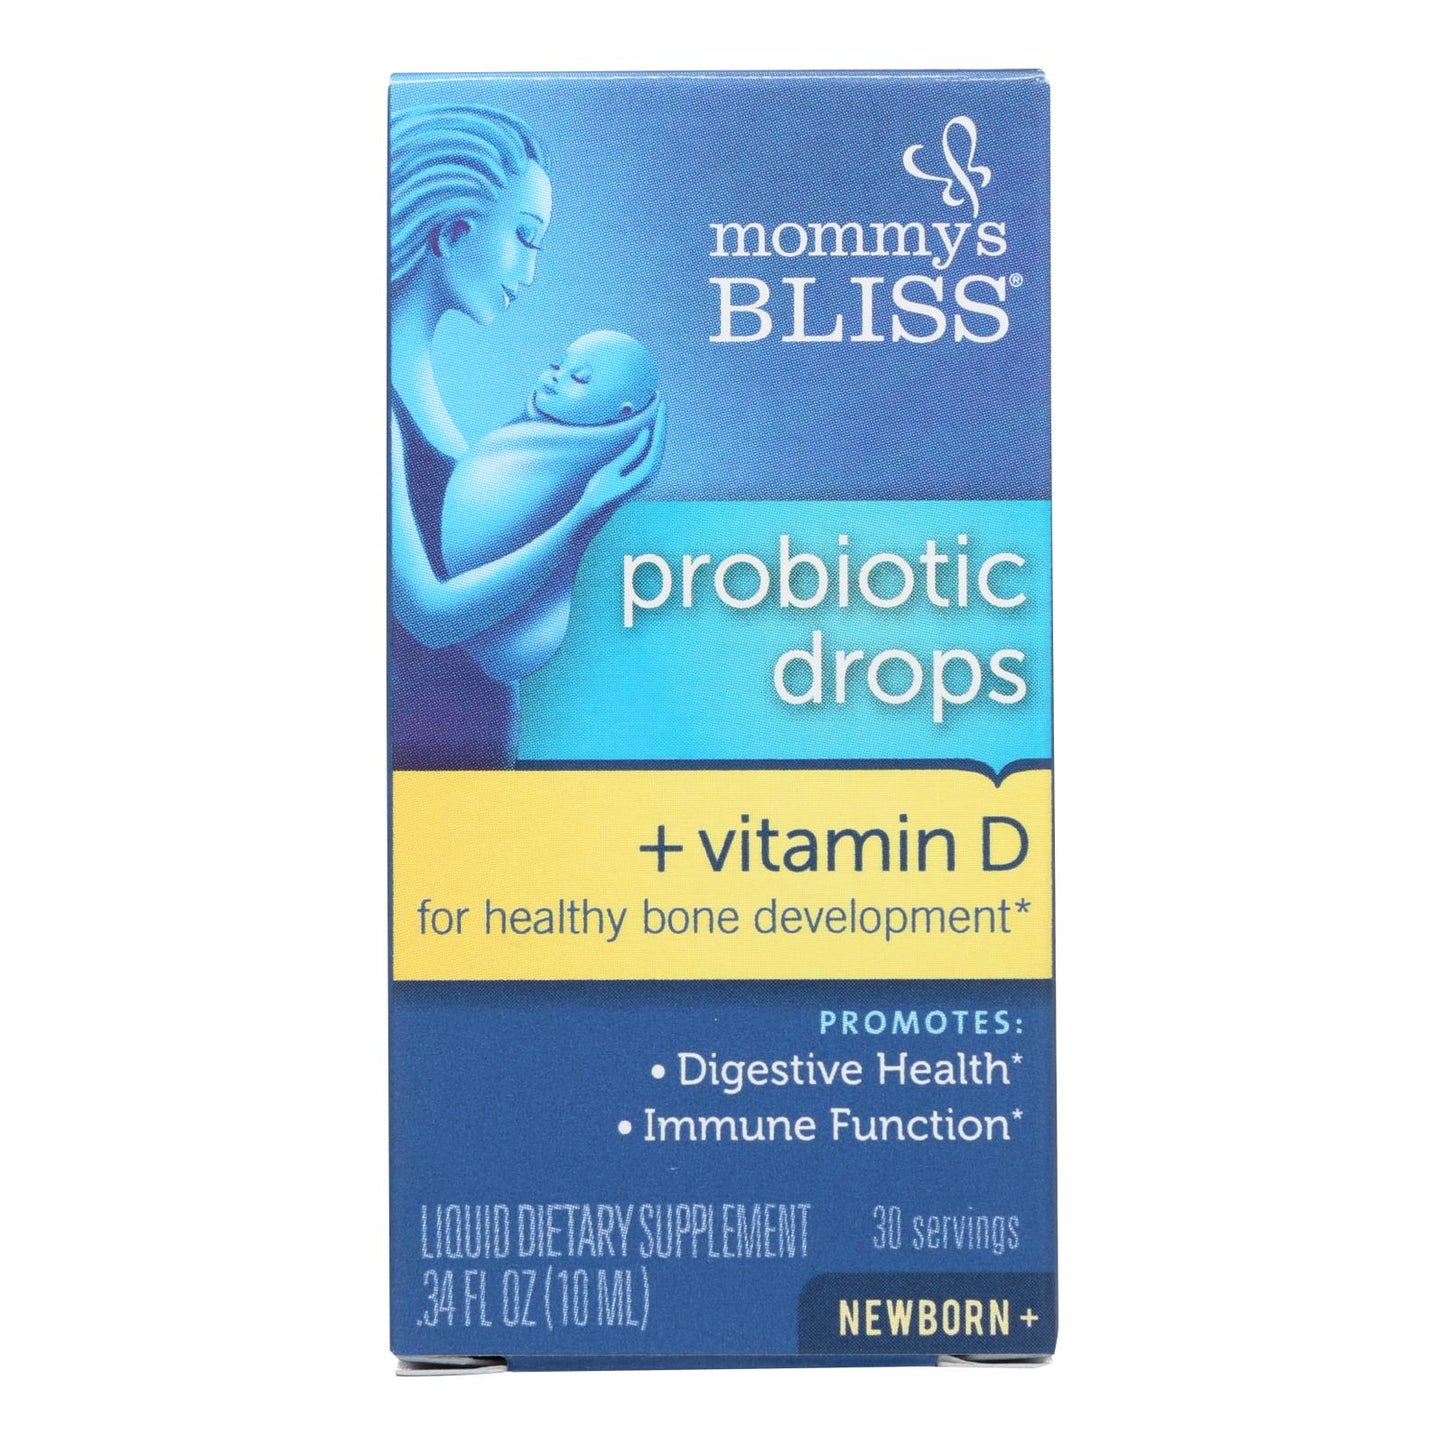 Mommy's Bliss Probiotic Drops + Vitamin D  - 1 Each - .34 Fz